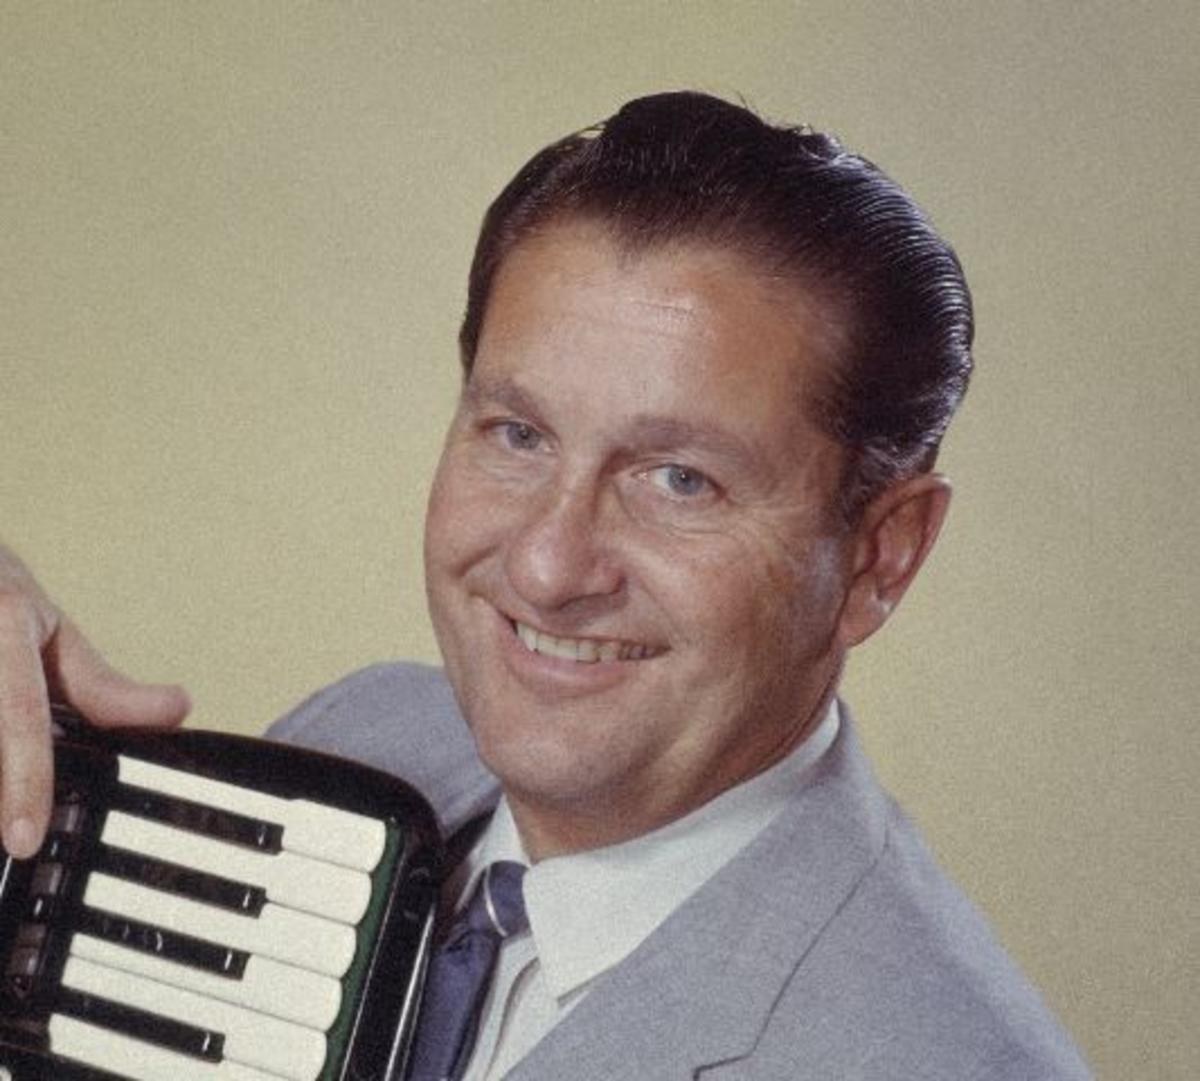 who is still alive from the lawrence welk show